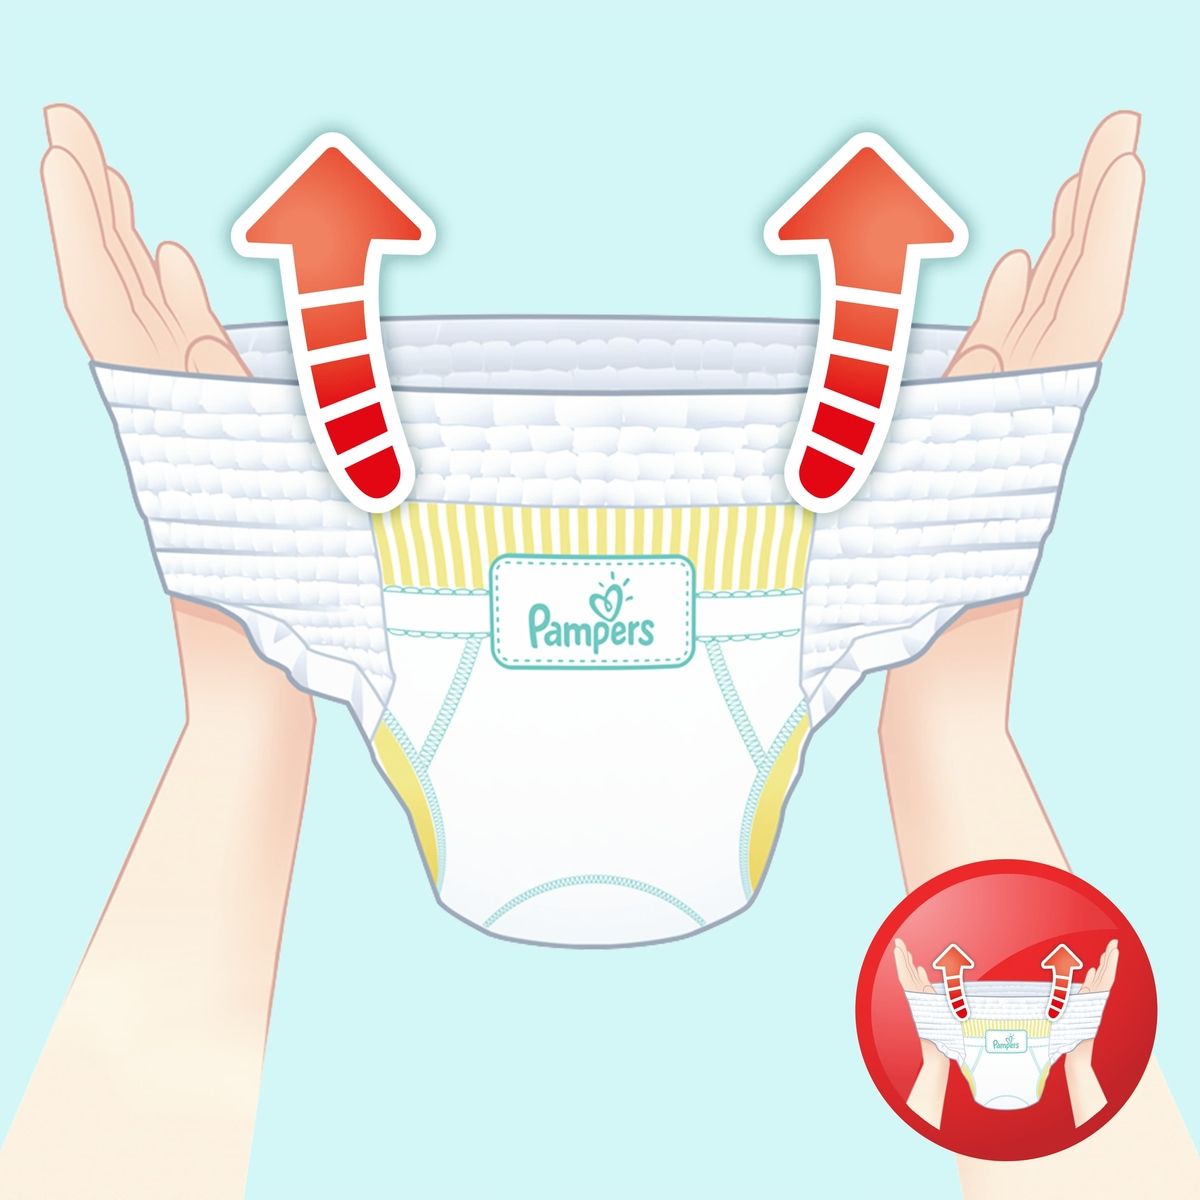 Pampers Pants  12-18  ( 5) 15 